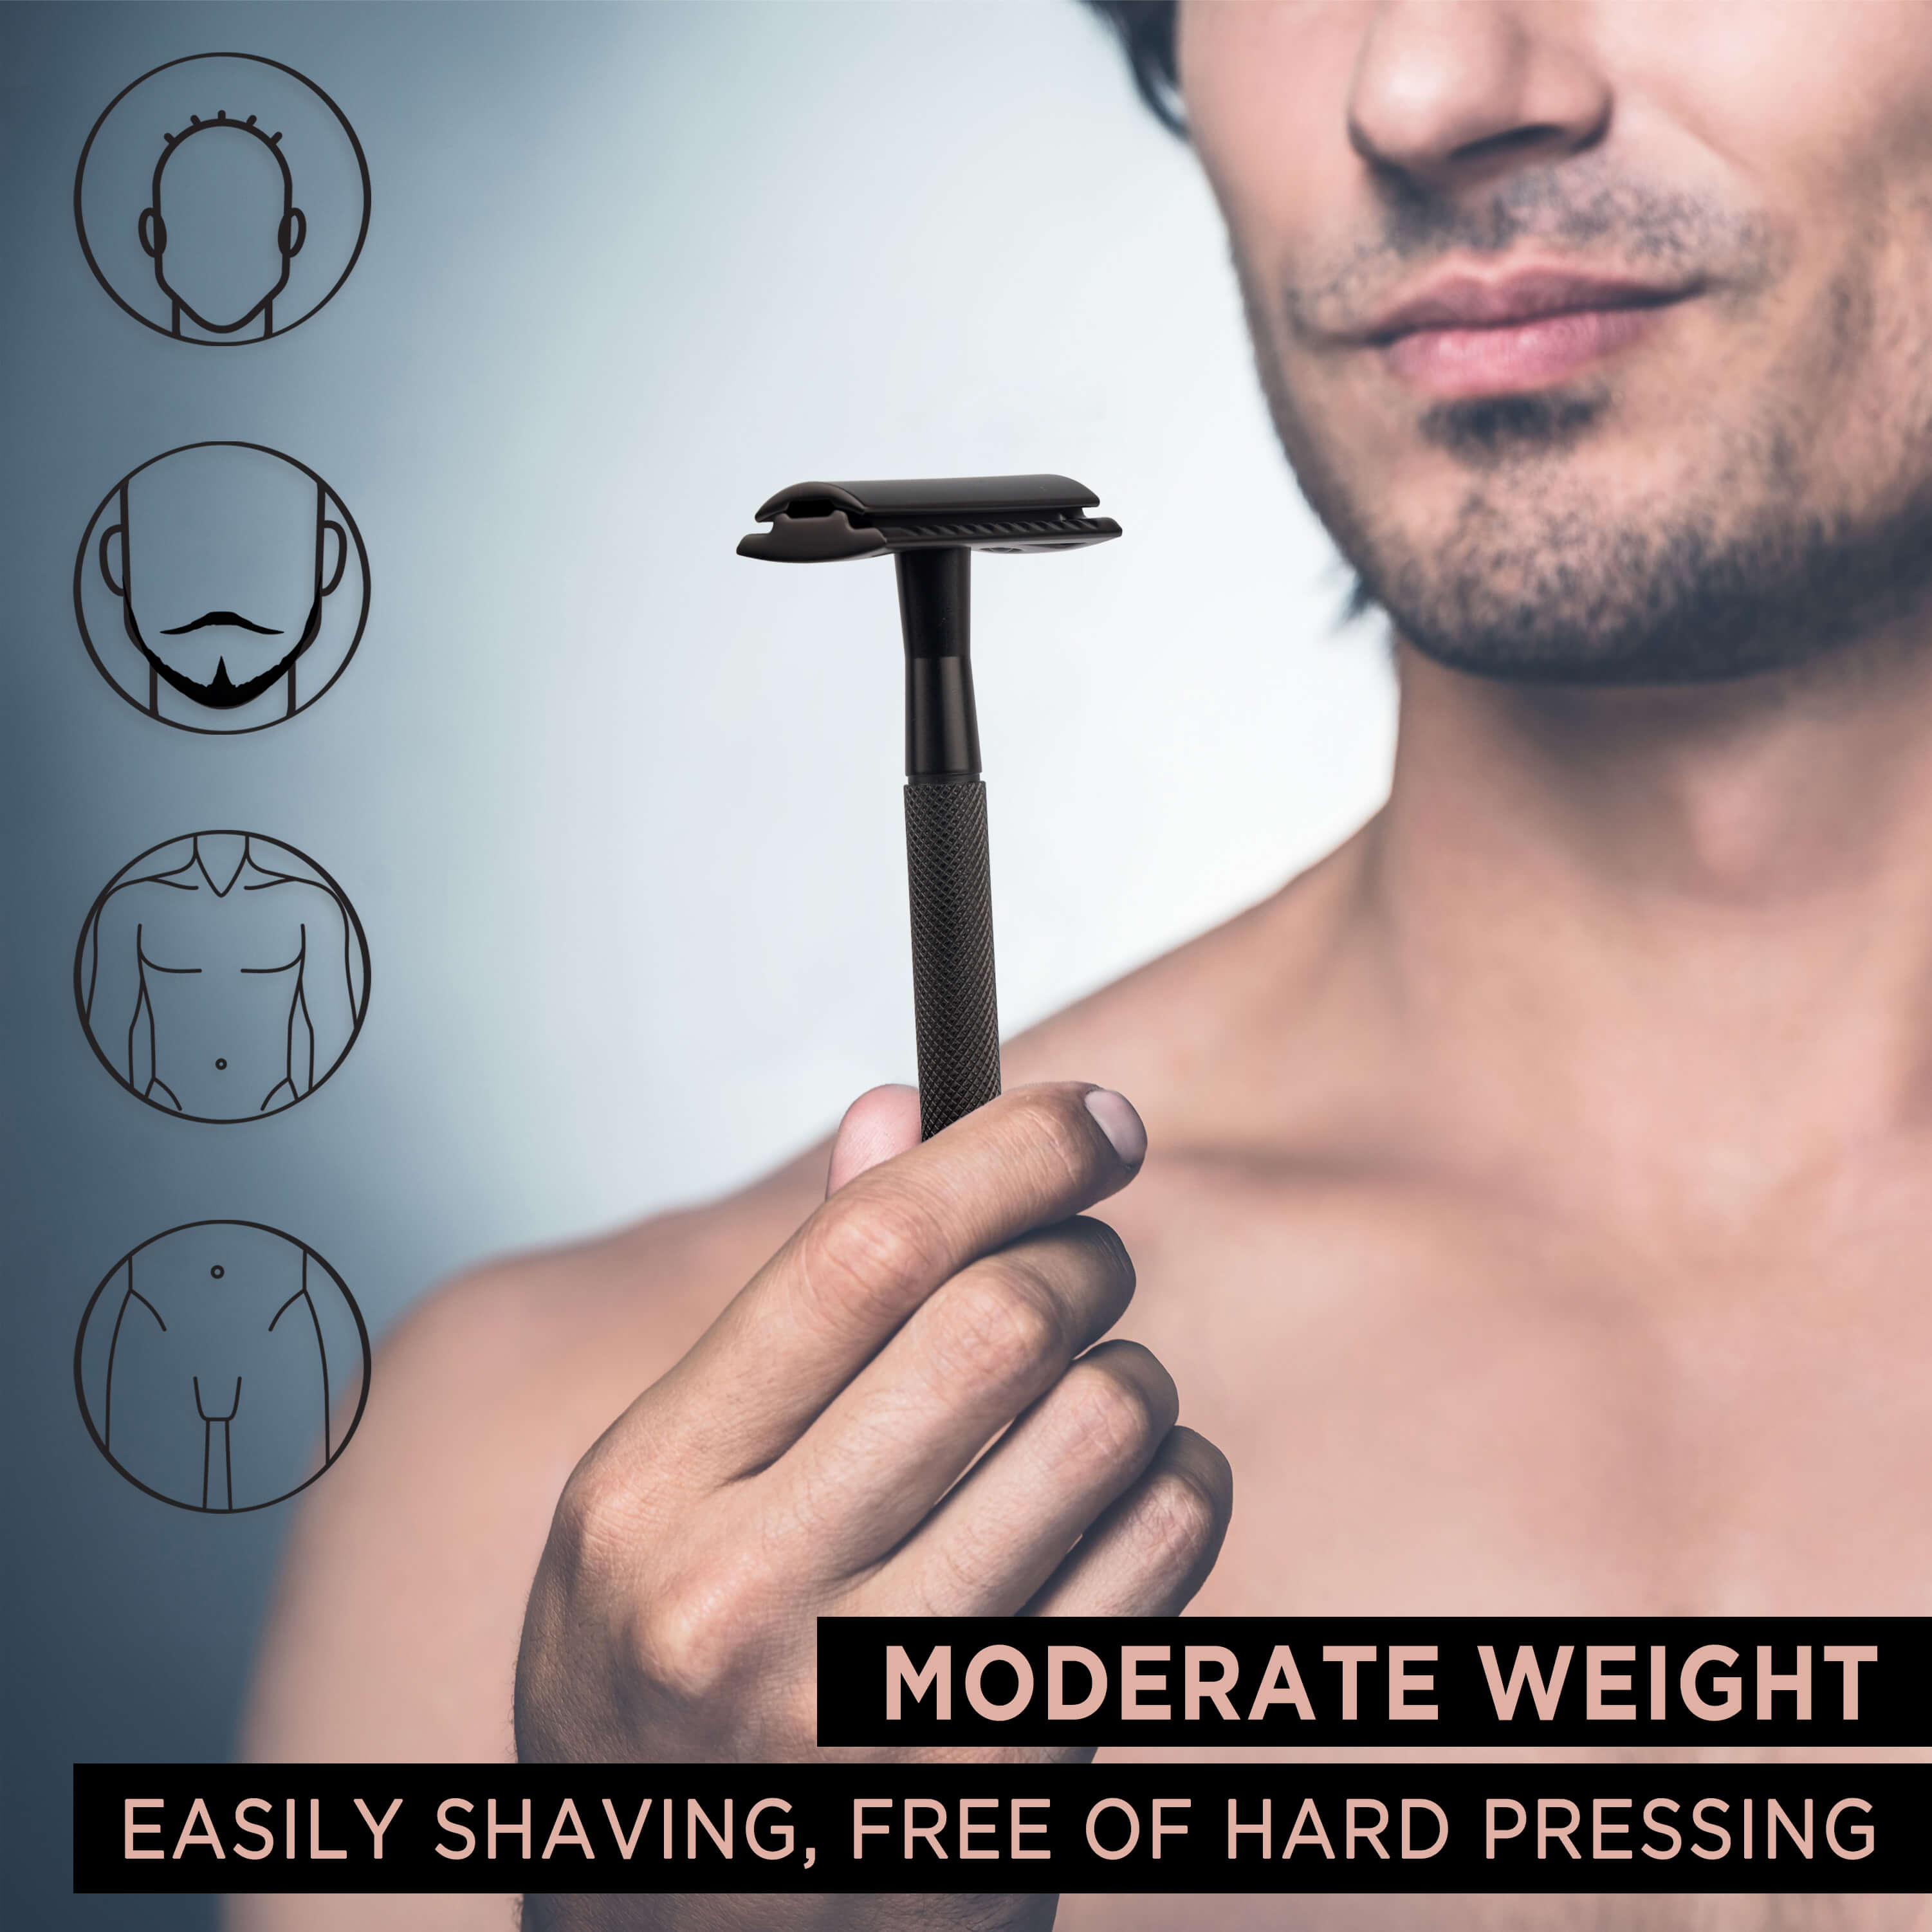 Which Parts Of The Men's Body Can Be Used With ZOMCHI Black Razors